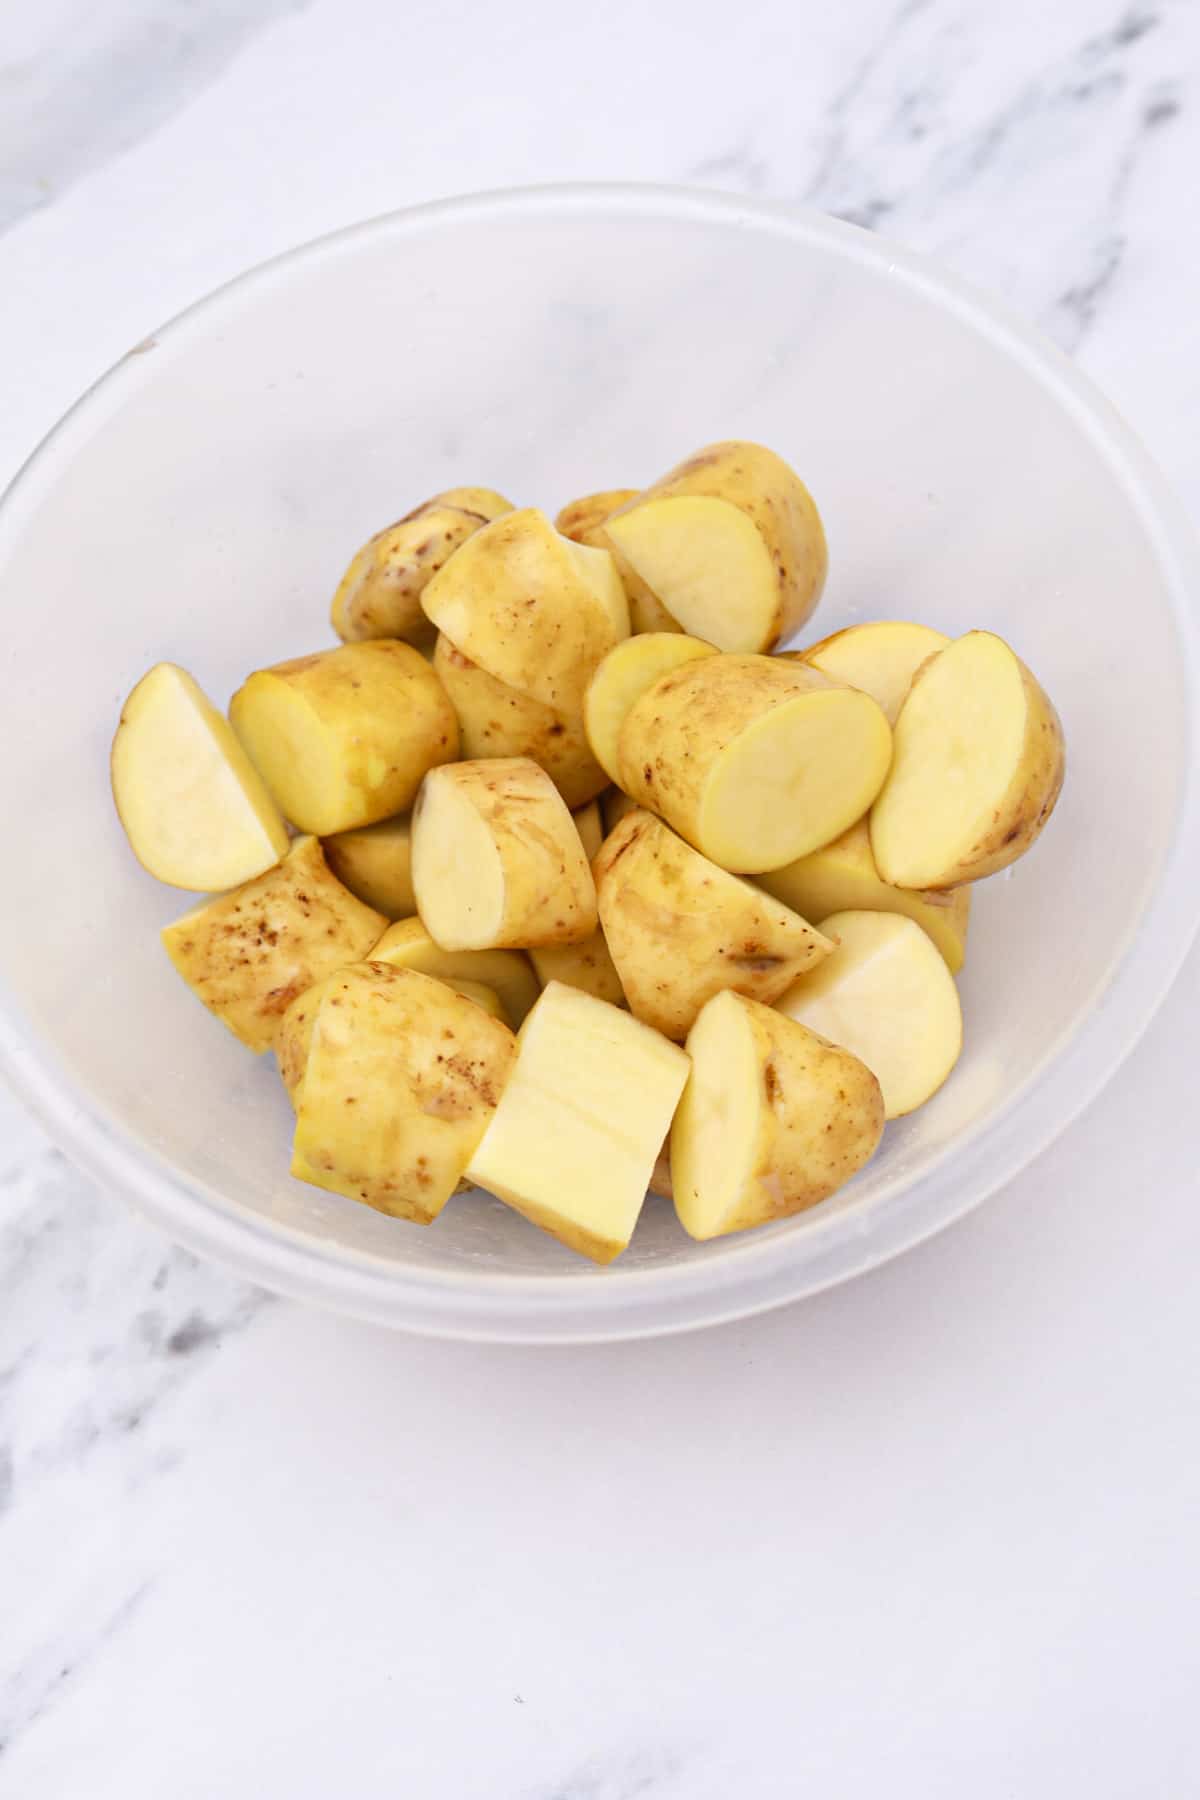 washed and cut potatoes in a bowl.